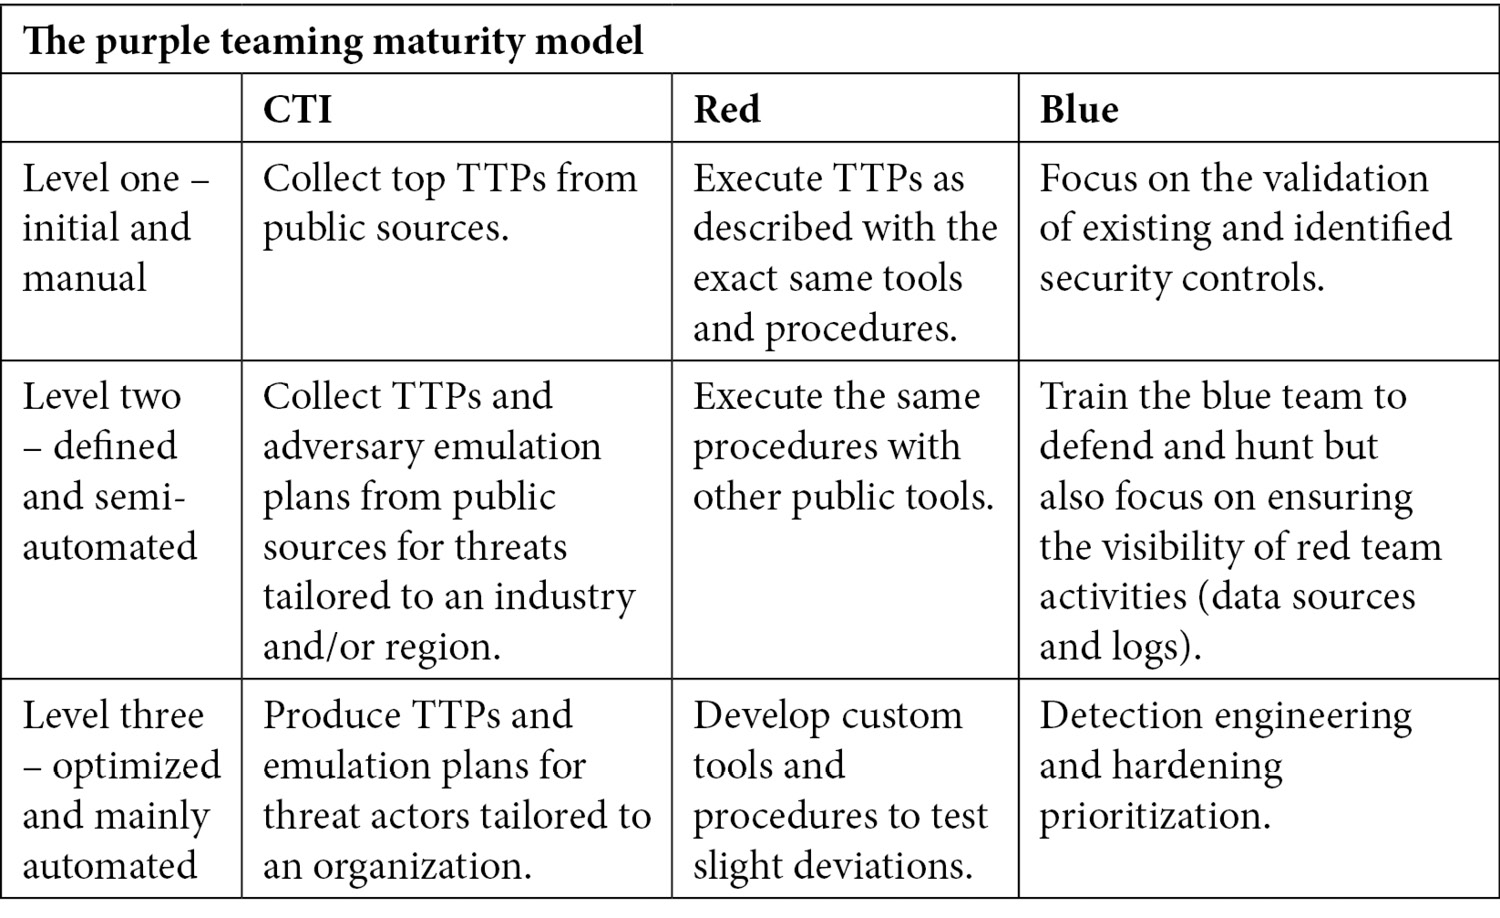 Table 2.2 – The purple teaming maturity model
